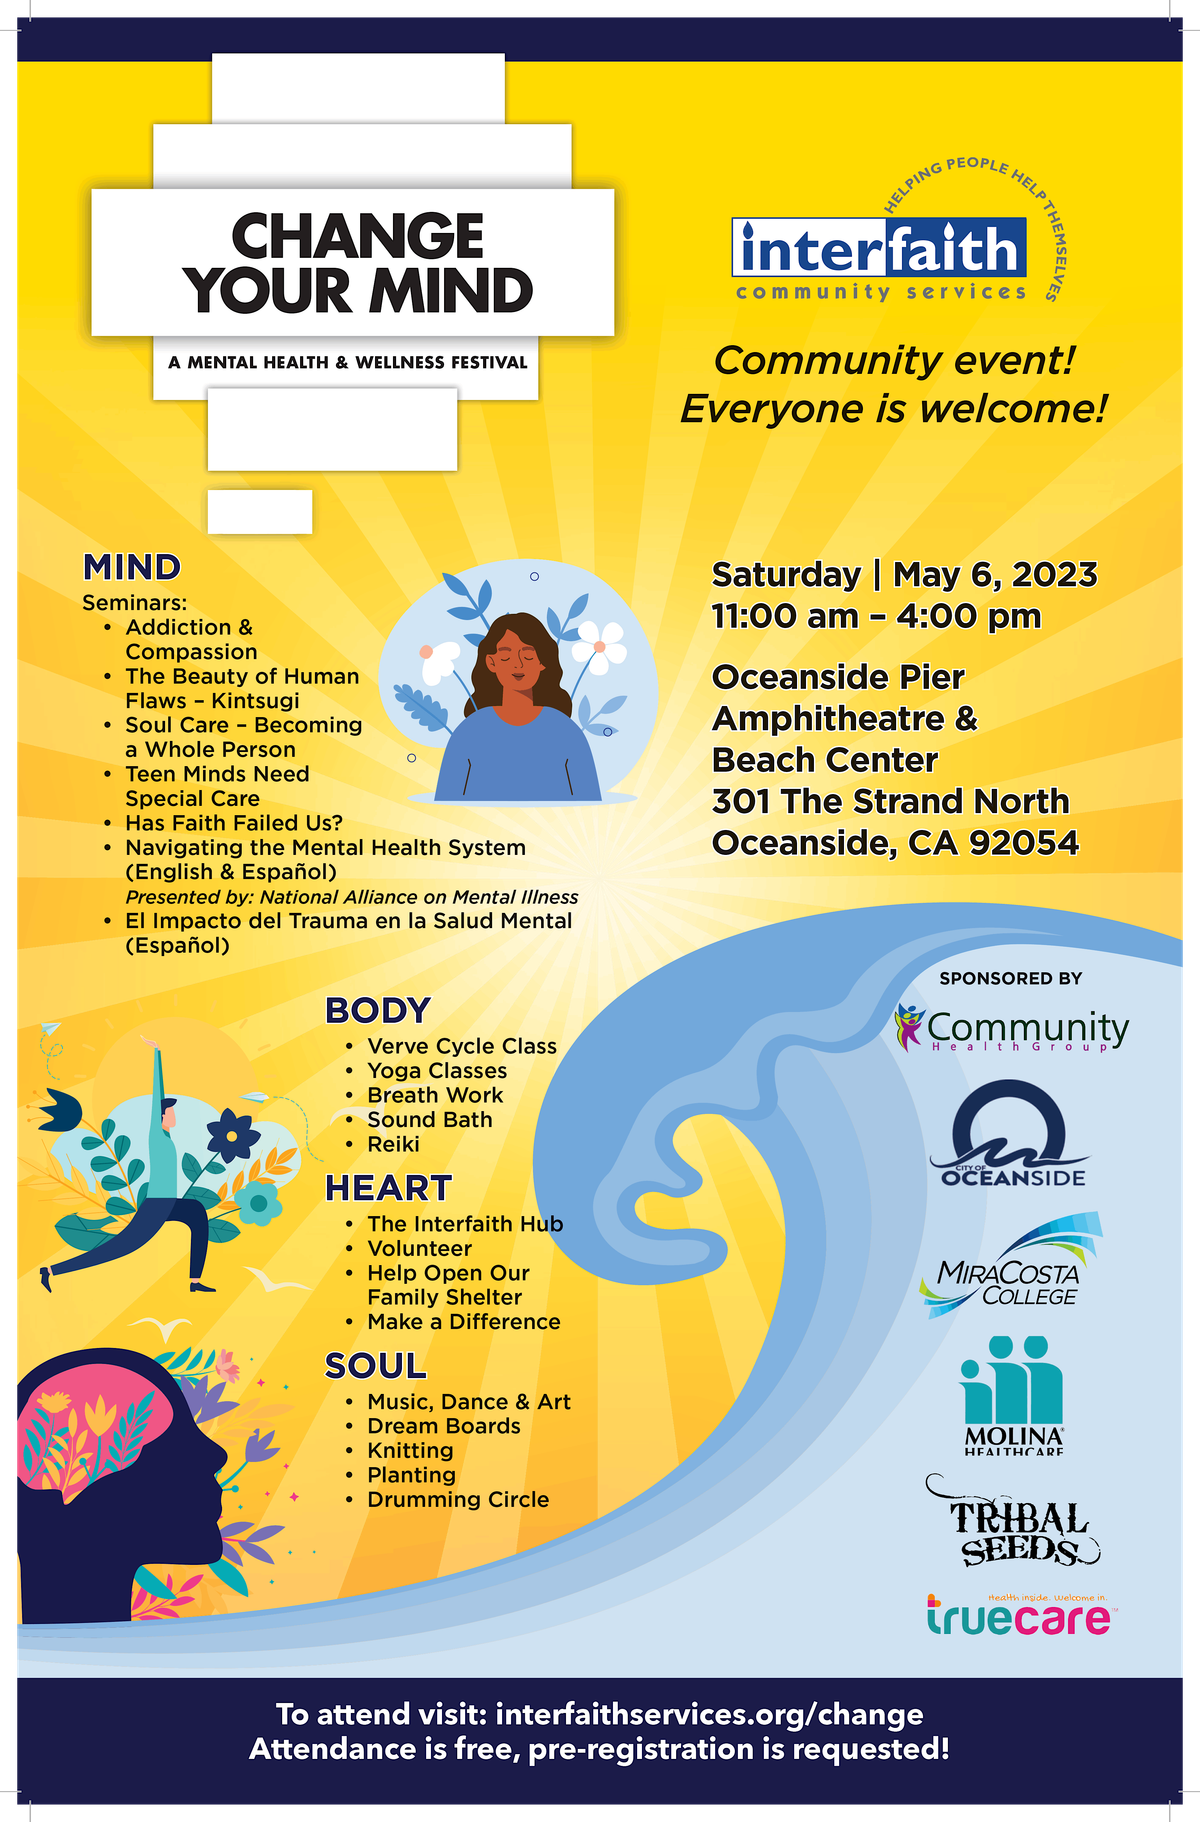 Change Your Mind Mental Health and Wellness Festival